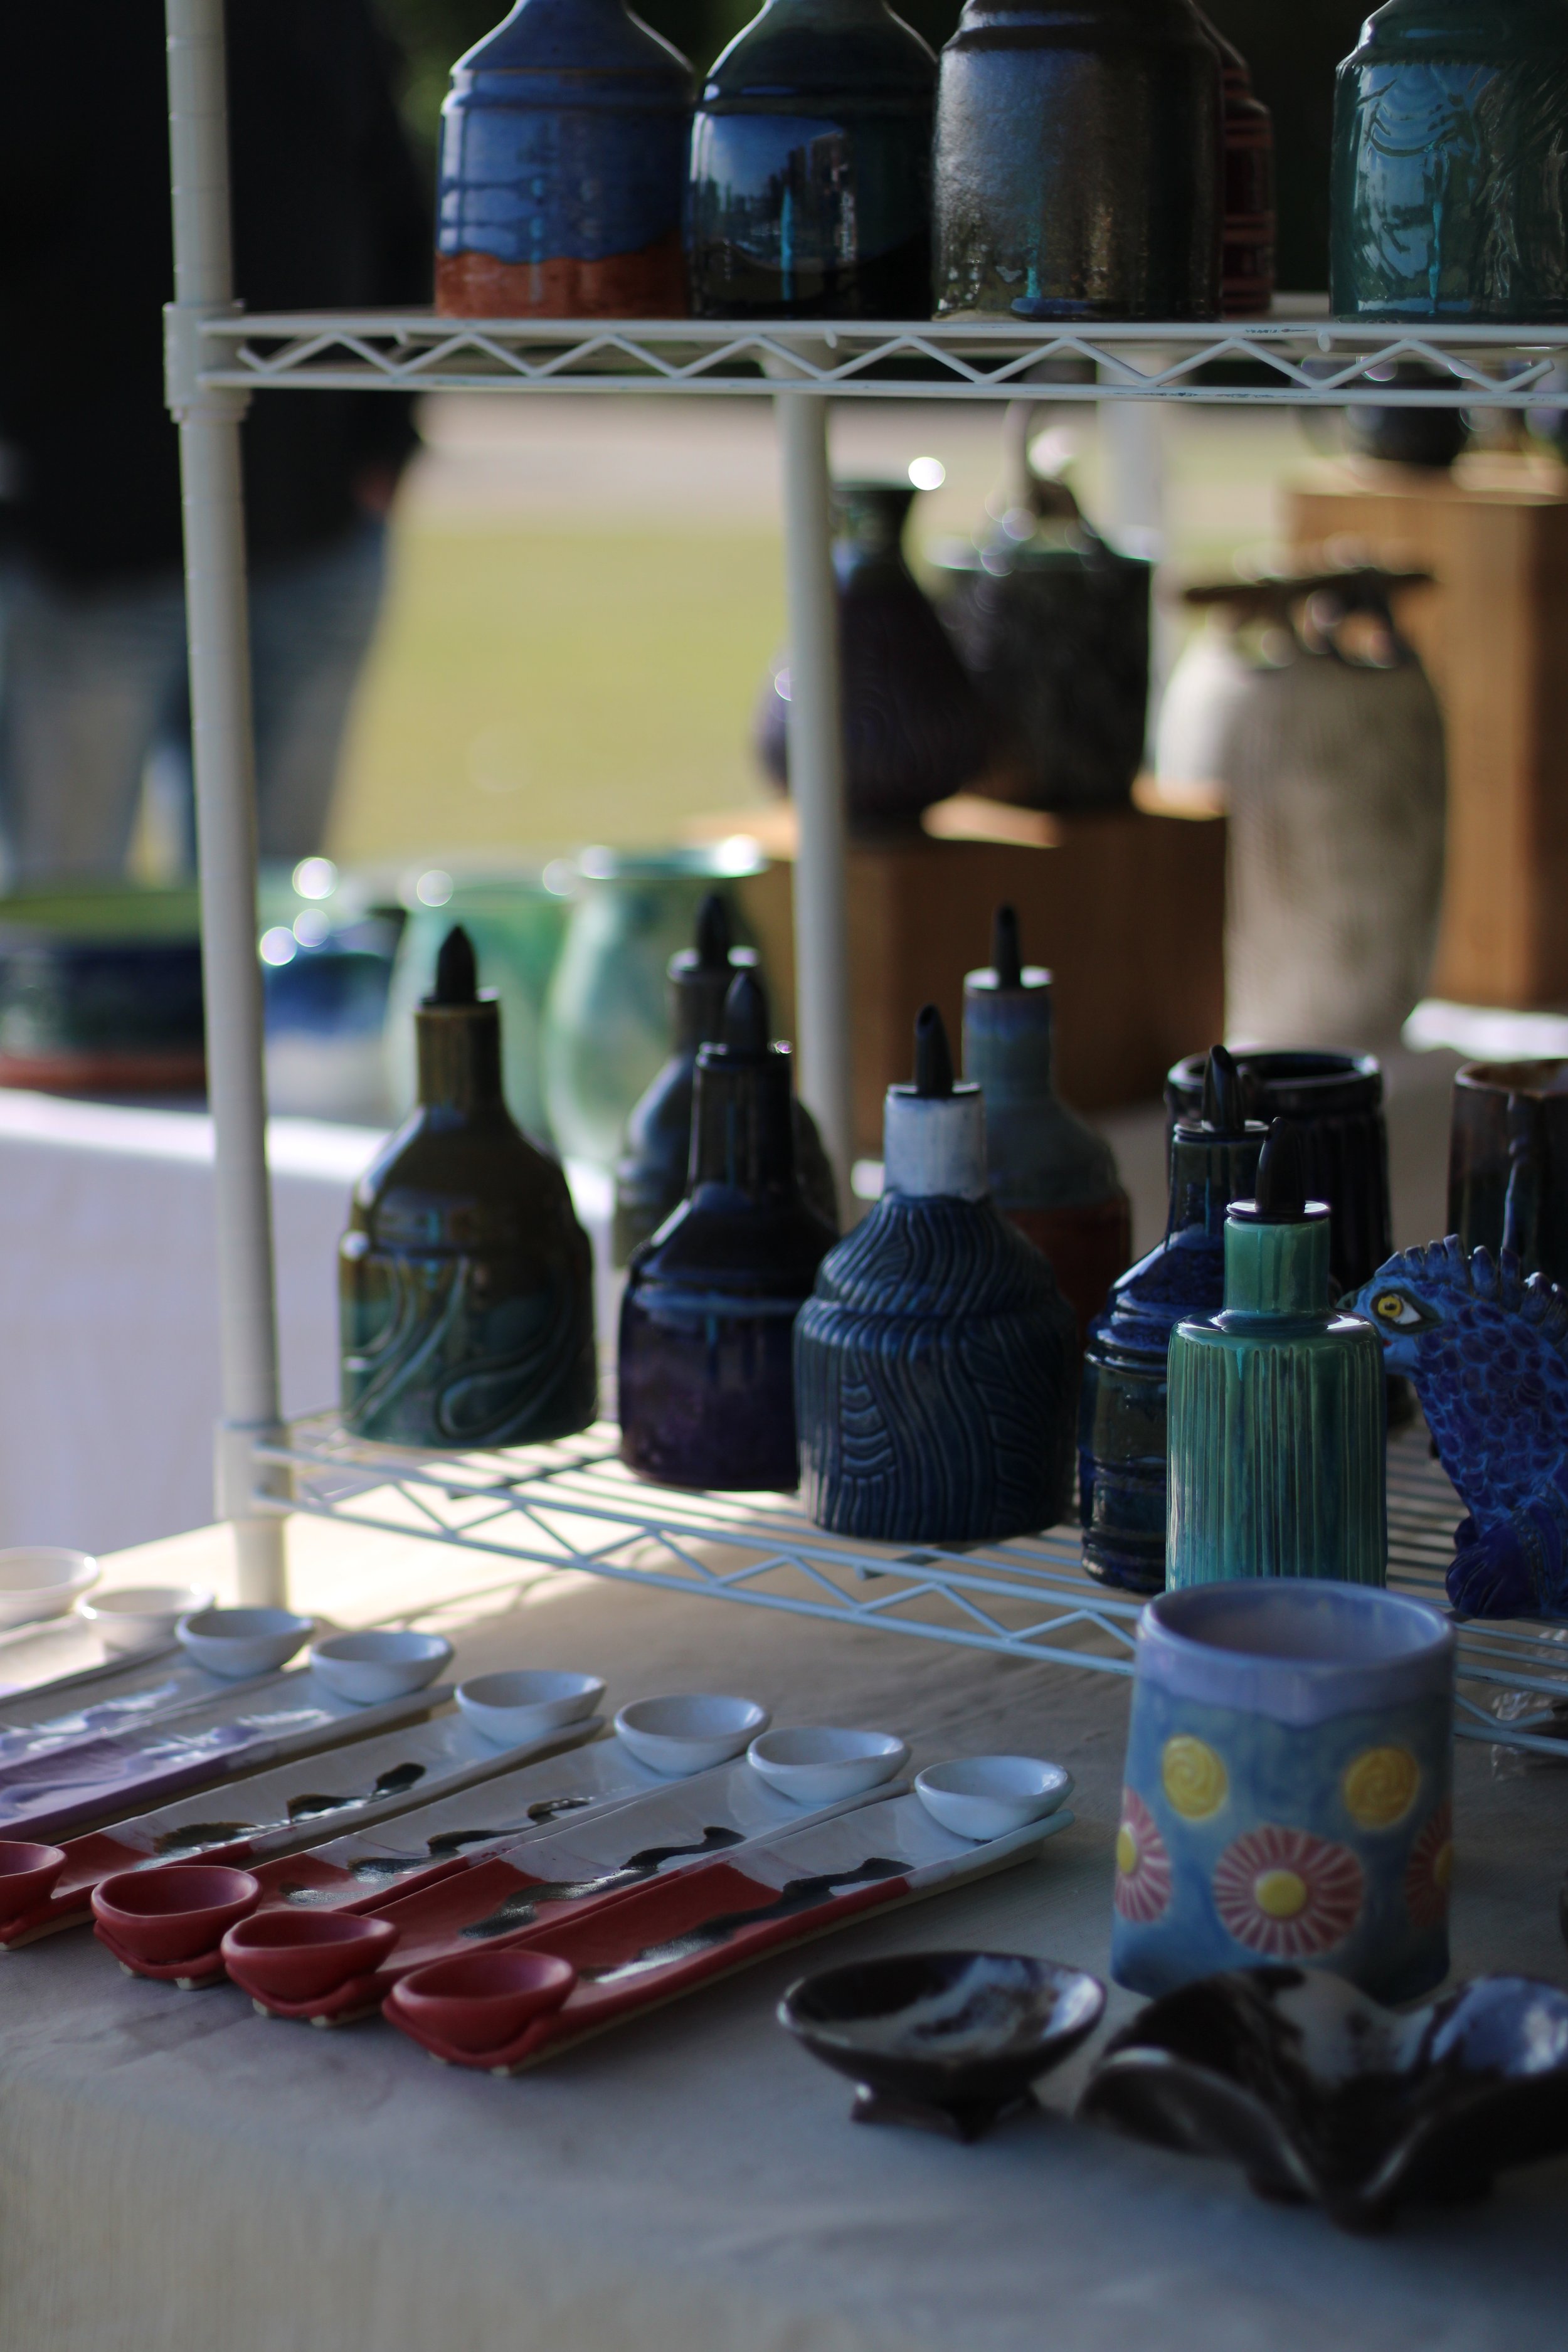  Michael Wetzel featured olive oil bottles and sushi plates in this year’s sale. He has taken ceramics courses at Augusta University for 12 years. 